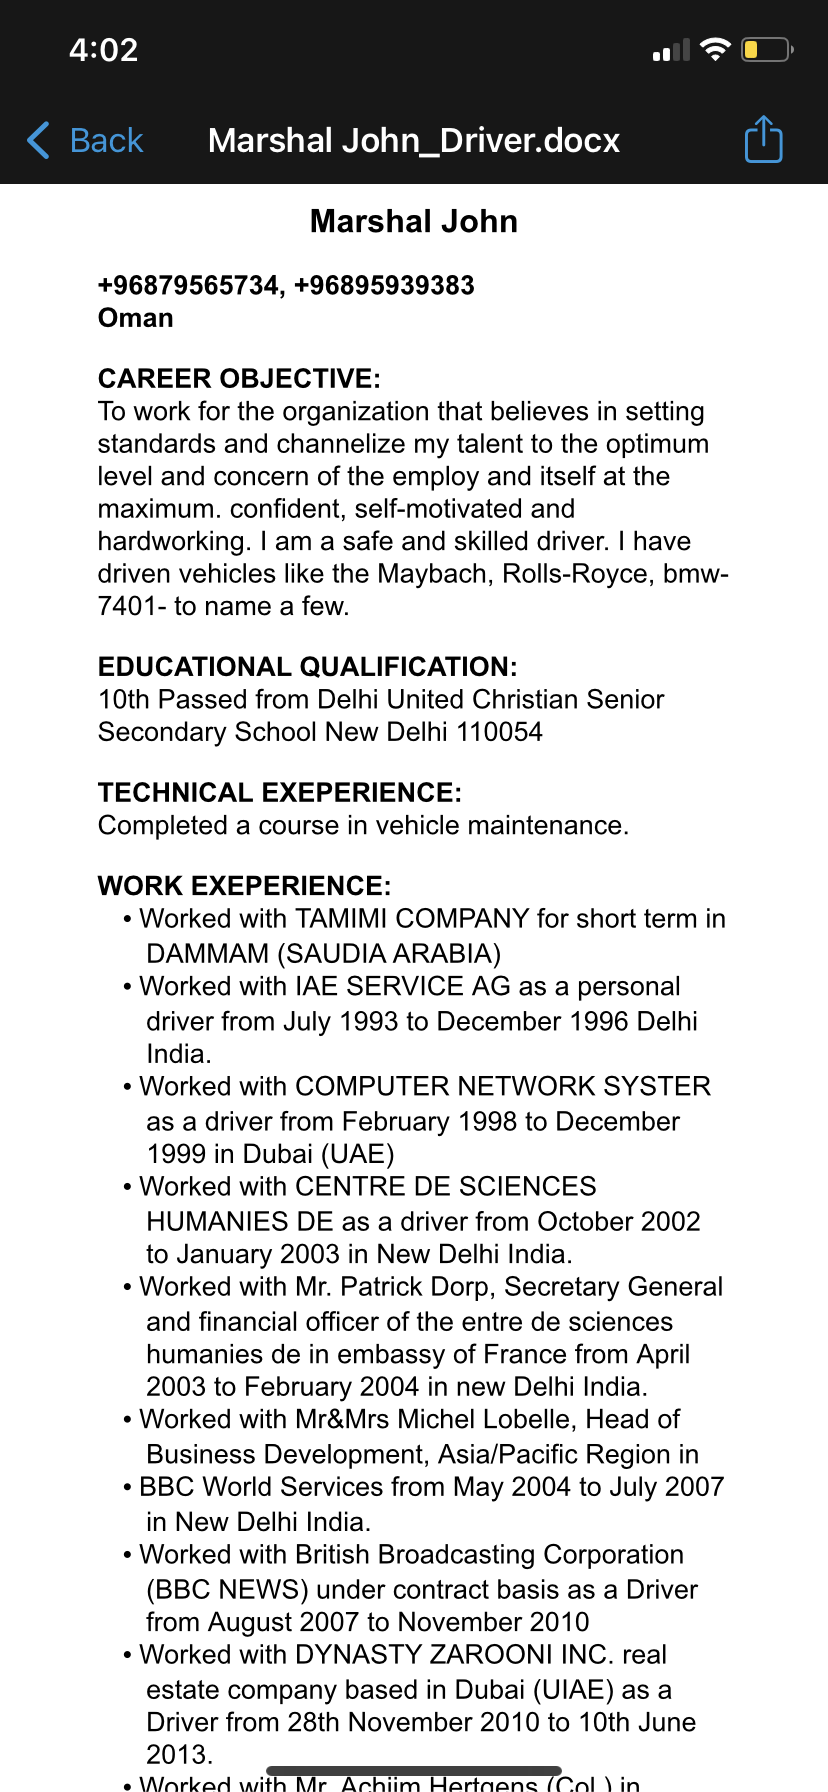 Marshal John_Driver.docx

 

Marshal John

+96879565734, +96895939383
Oman

CAREER OBJECTIVE:

To work for the organization that believes in setting
standards and channelize my talent to the optimum
level and concern of the employ and itself at the
maximum. confident, self-motivated and
hardworking. | am a safe and skilled driver. | have
driven vehicles like the Maybach, Rolls-Royce, bmw-
7401- to name a few.

EDUCATIONAL QUALIFICATION:
10th Passed from Delhi United Christian Senior
Secondary School New Delhi 110054

TECHNICAL EXEPERIENCE:
Completed a course in vehicle maintenance.

WORK EXEPERIENCE:

» Worked with TAMIMI COMPANY for short term in
DAMMAM (SAUDIA ARABIA)

« Worked with IAE SERVICE AG as a personal
driver from July 1993 to December 1996 Delhi
India.

» Worked with COMPUTER NETWORK SYSTER
as a driver from February 1998 to December
1999 in Dubai (UAE)

» Worked with CENTRE DE SCIENCES
HUMANIES DE as a driver from October 2002
to January 2003 in New Delhi India.

* Worked with Mr. Patrick Dorp, Secretary General
and financial officer of the entre de sciences
humanies de in embassy of France from April
2003 to February 2004 in new Delhi India.

» Worked with Mr&amp;Mrs Michel Lobelle, Head of
Business Development, Asia/Pacific Region in

« BBC World Services from May 2004 to July 2007
in New Delhi India

» Worked with British Broadcasting Corporation
(BBC NEWS) under contract basis as a Driver
from August 2007 to November 2010

» Worked with DYNASTY ZAROONI INC. real
estate company based in Dubai (UIAE) as a
Driver from 28th November 2010 to 10th June

2013.
oe Wnrked wile — eR — a a Yin